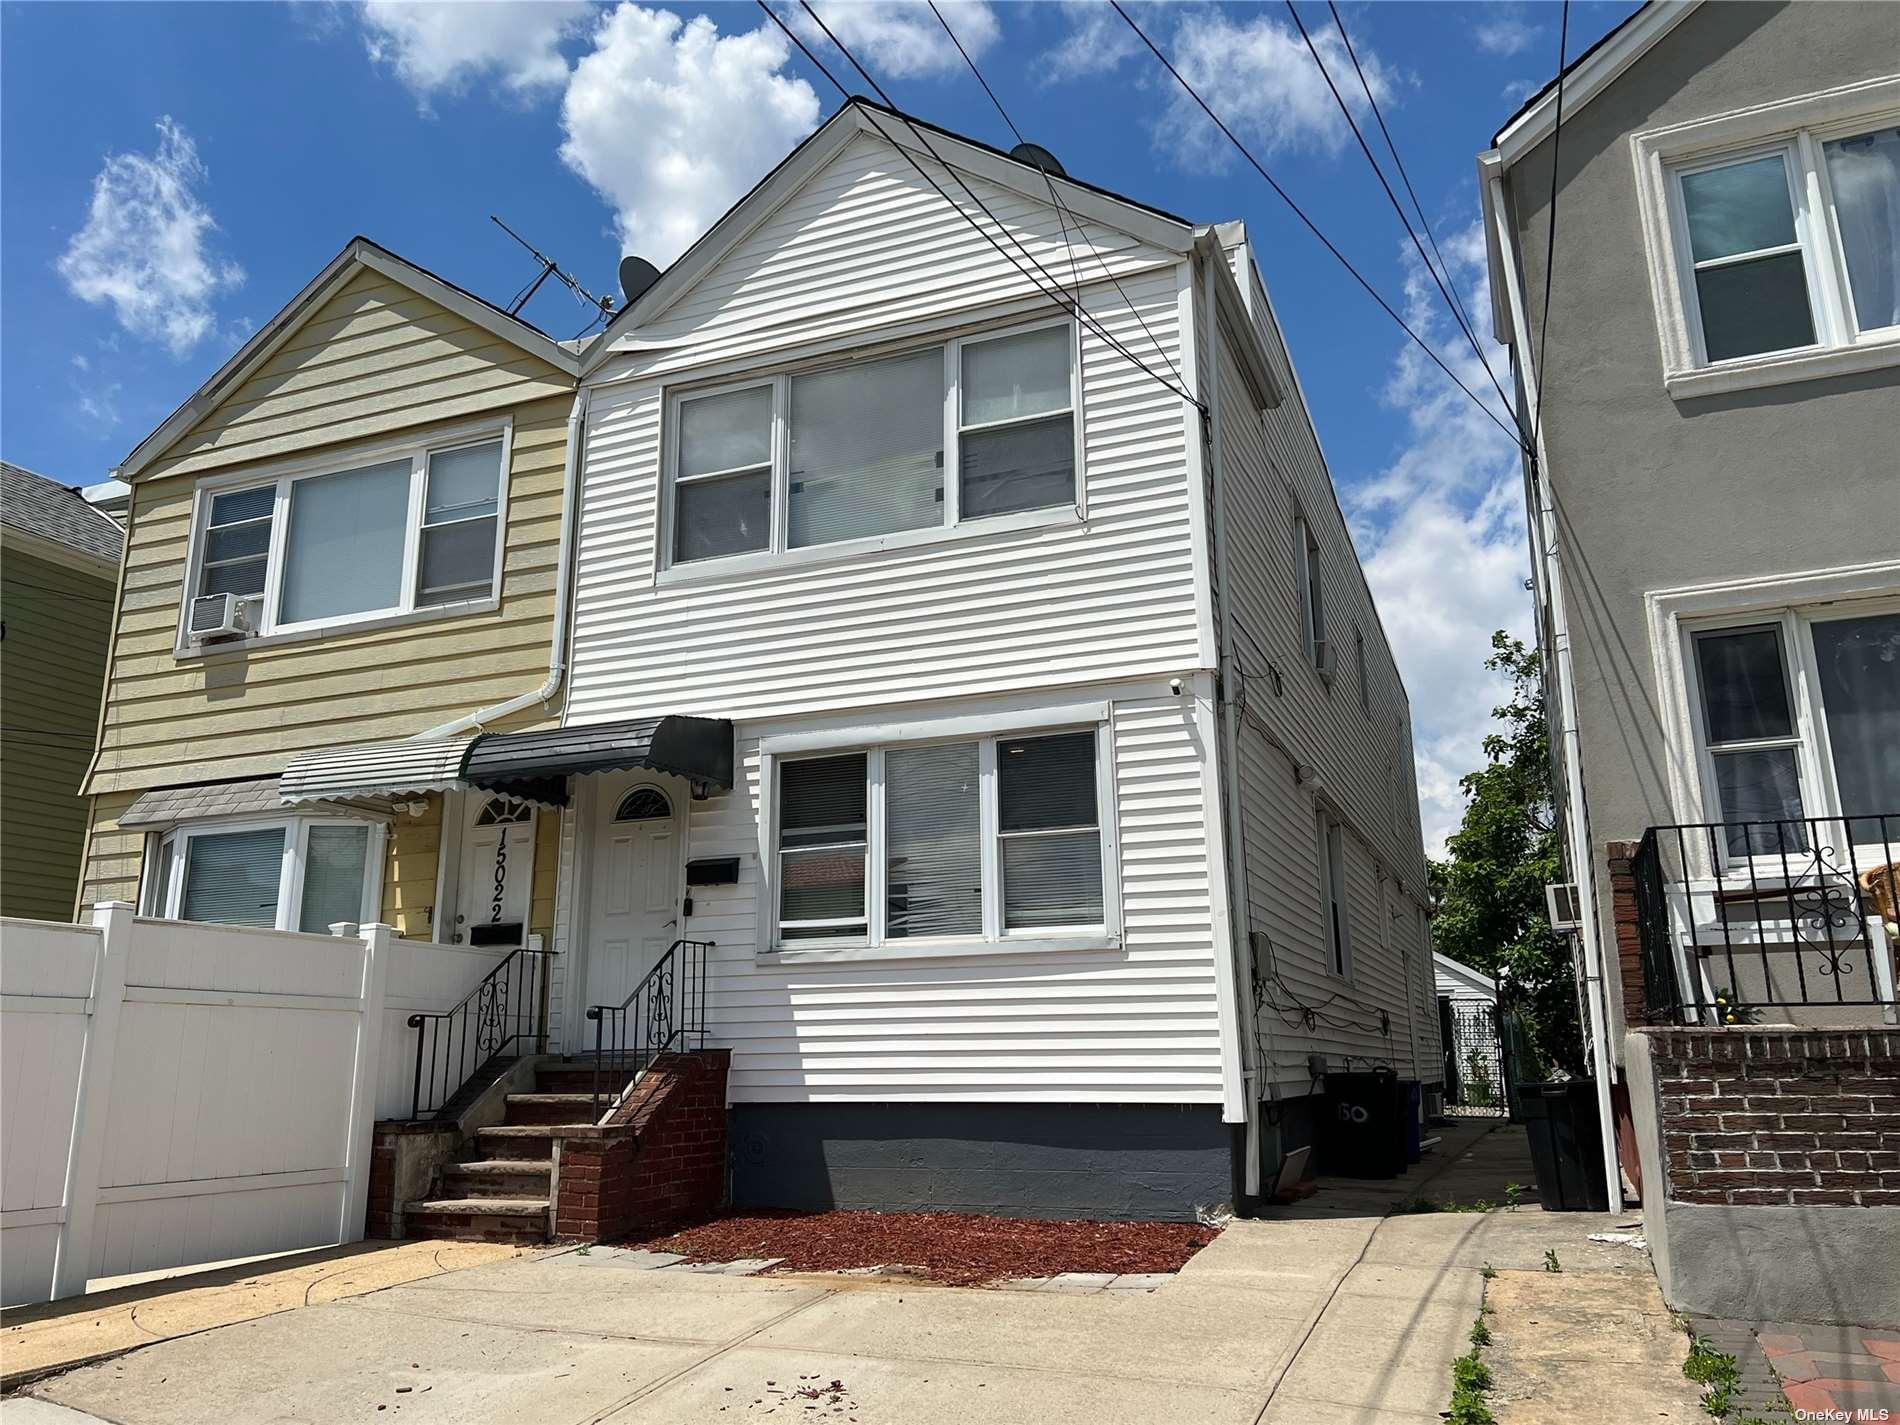 150-20 99th Place in Queens, Ozone Park, NY 11417